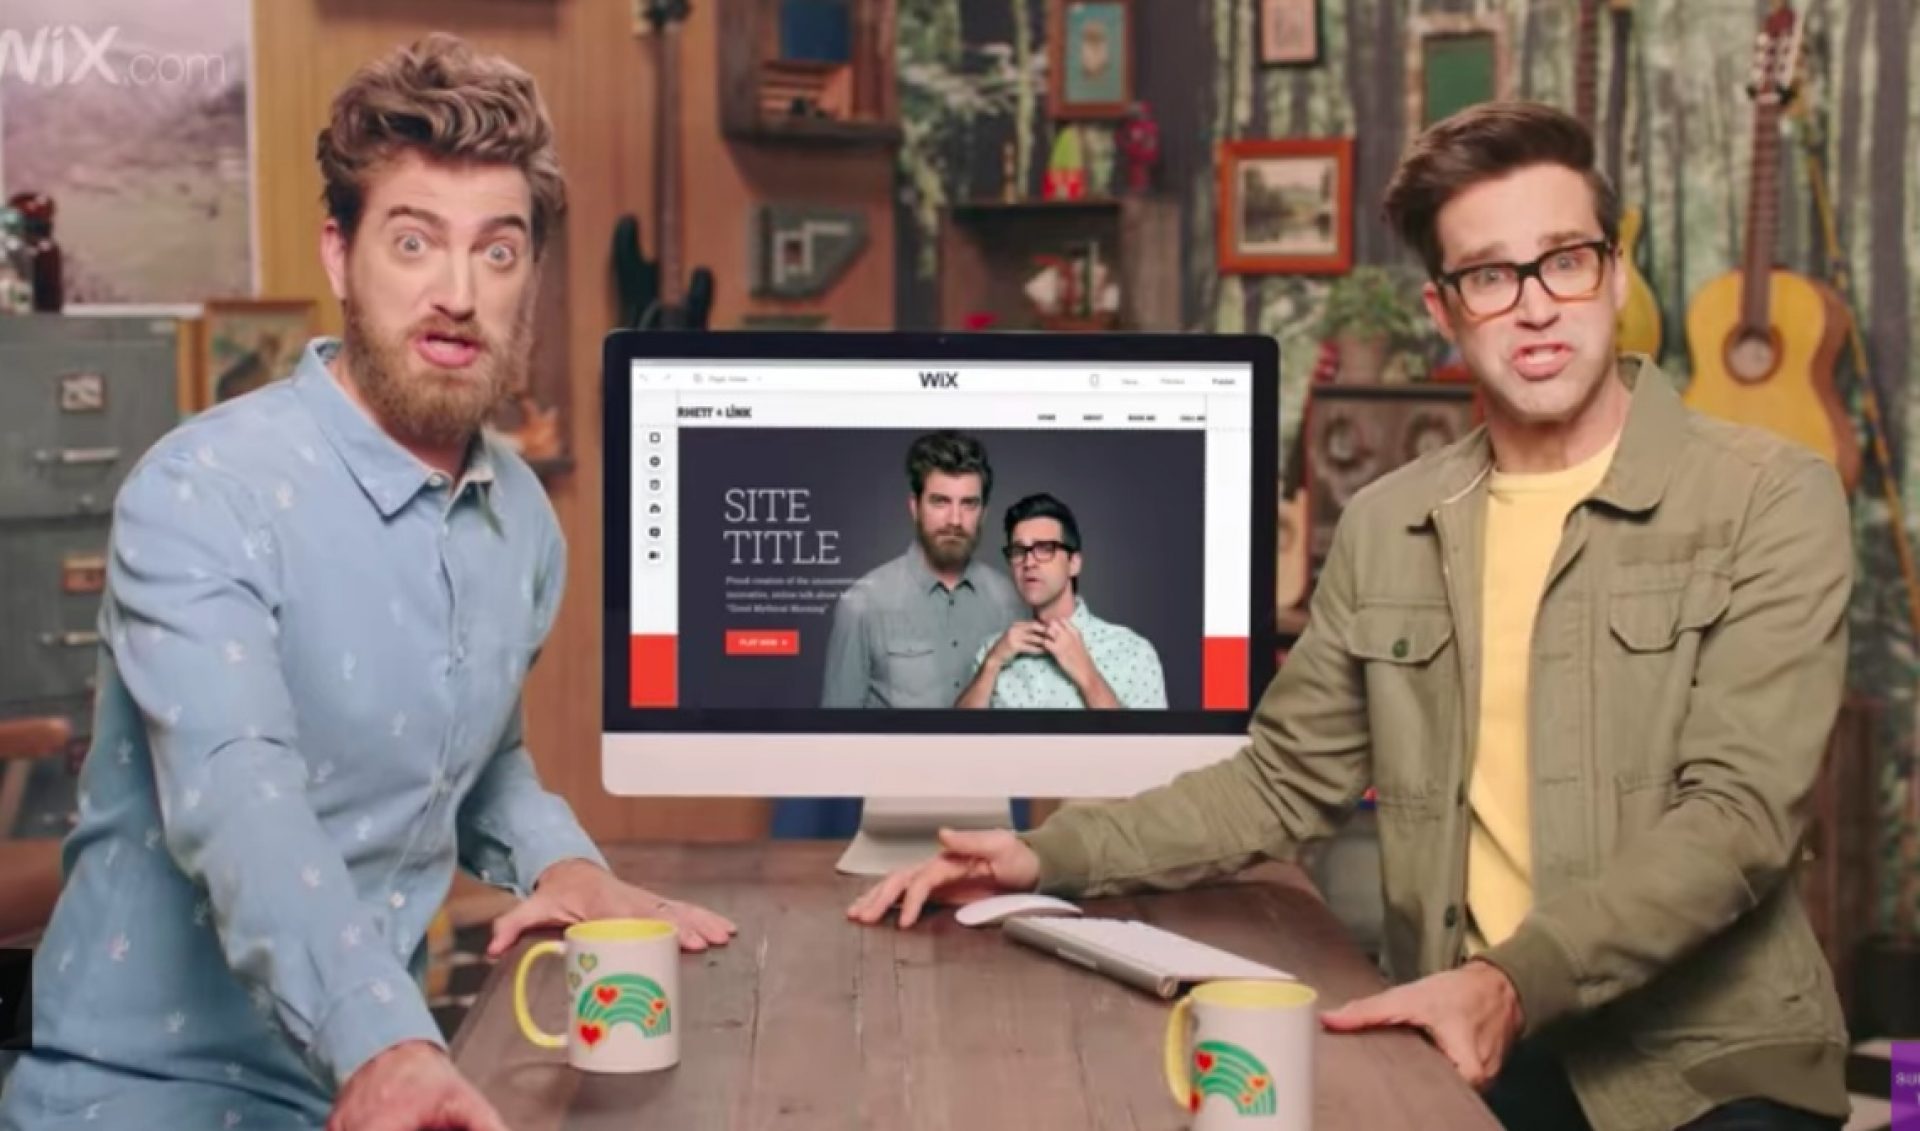 YouTube Stars Rhett And Link Will Appear In Wix’s Super Bowl Ad